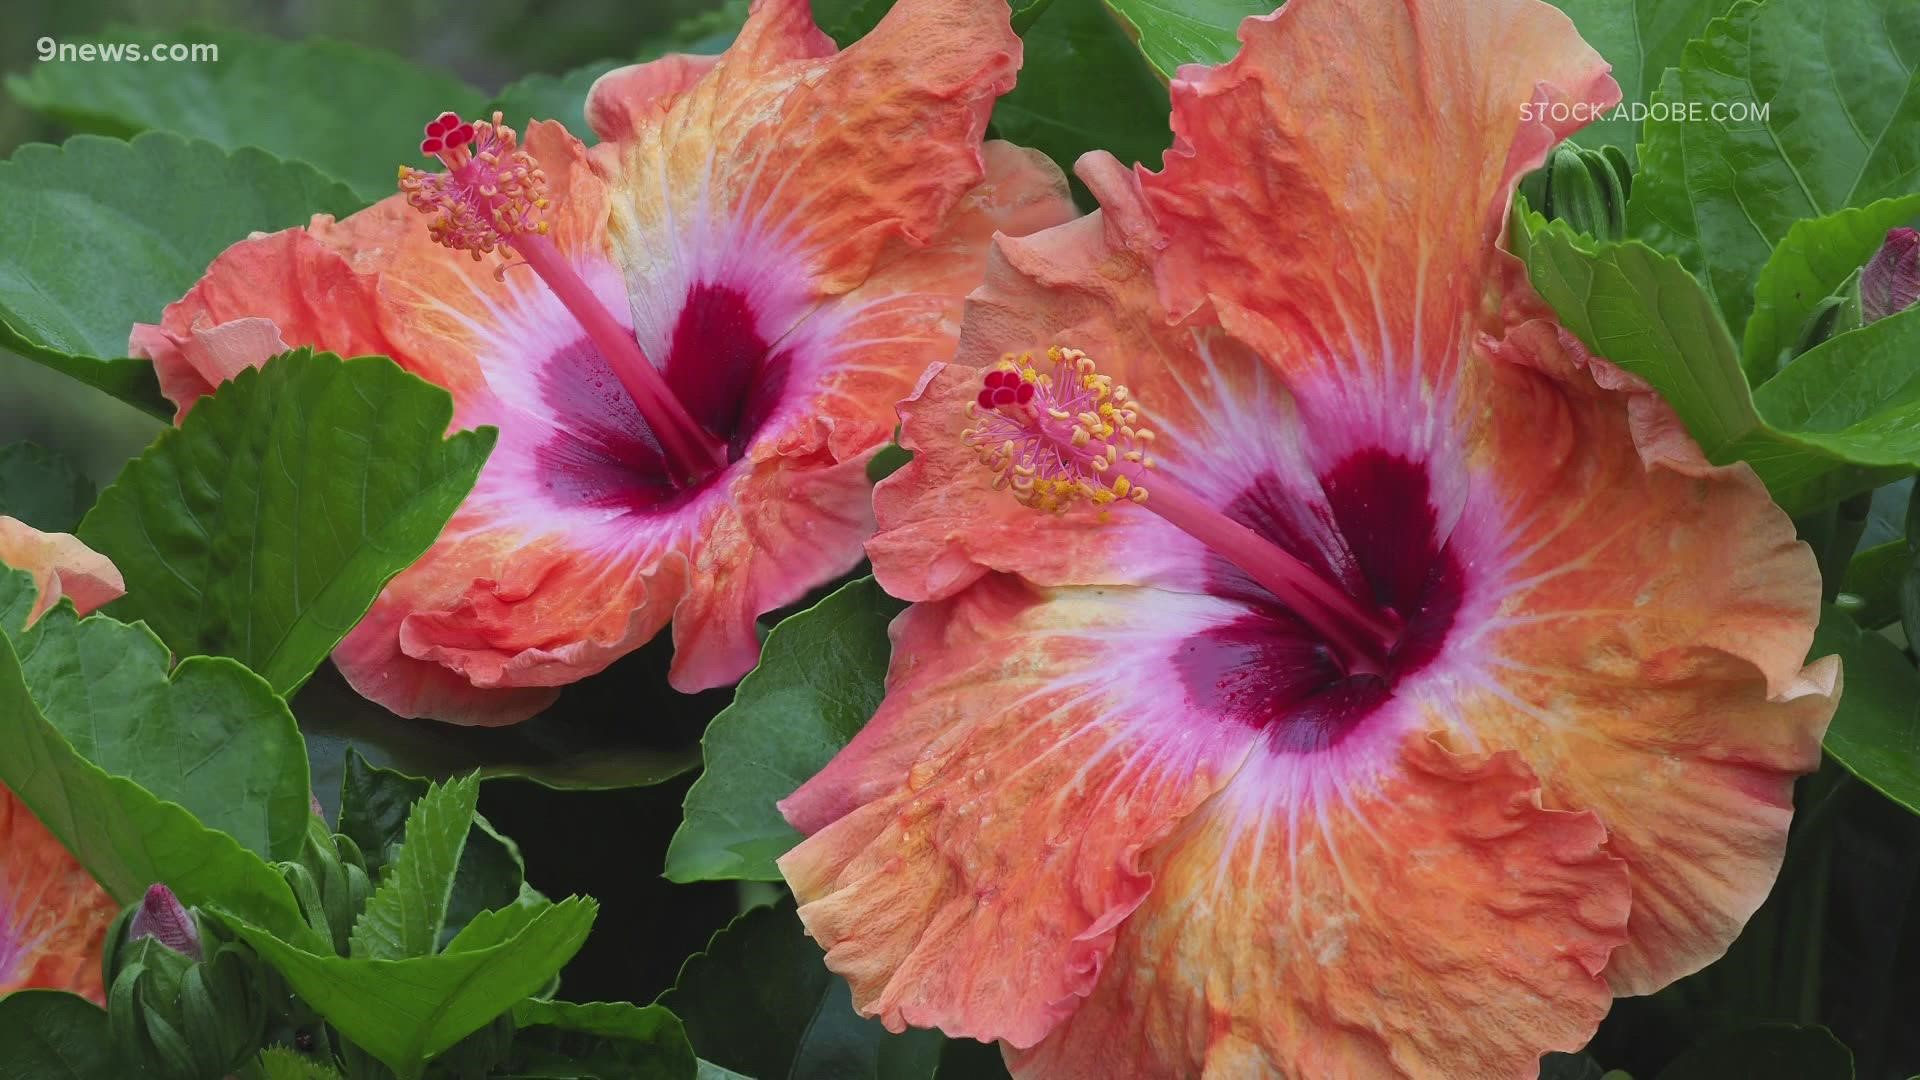 If you consider what conditions they prefer, you can grow a happy hibiscus.